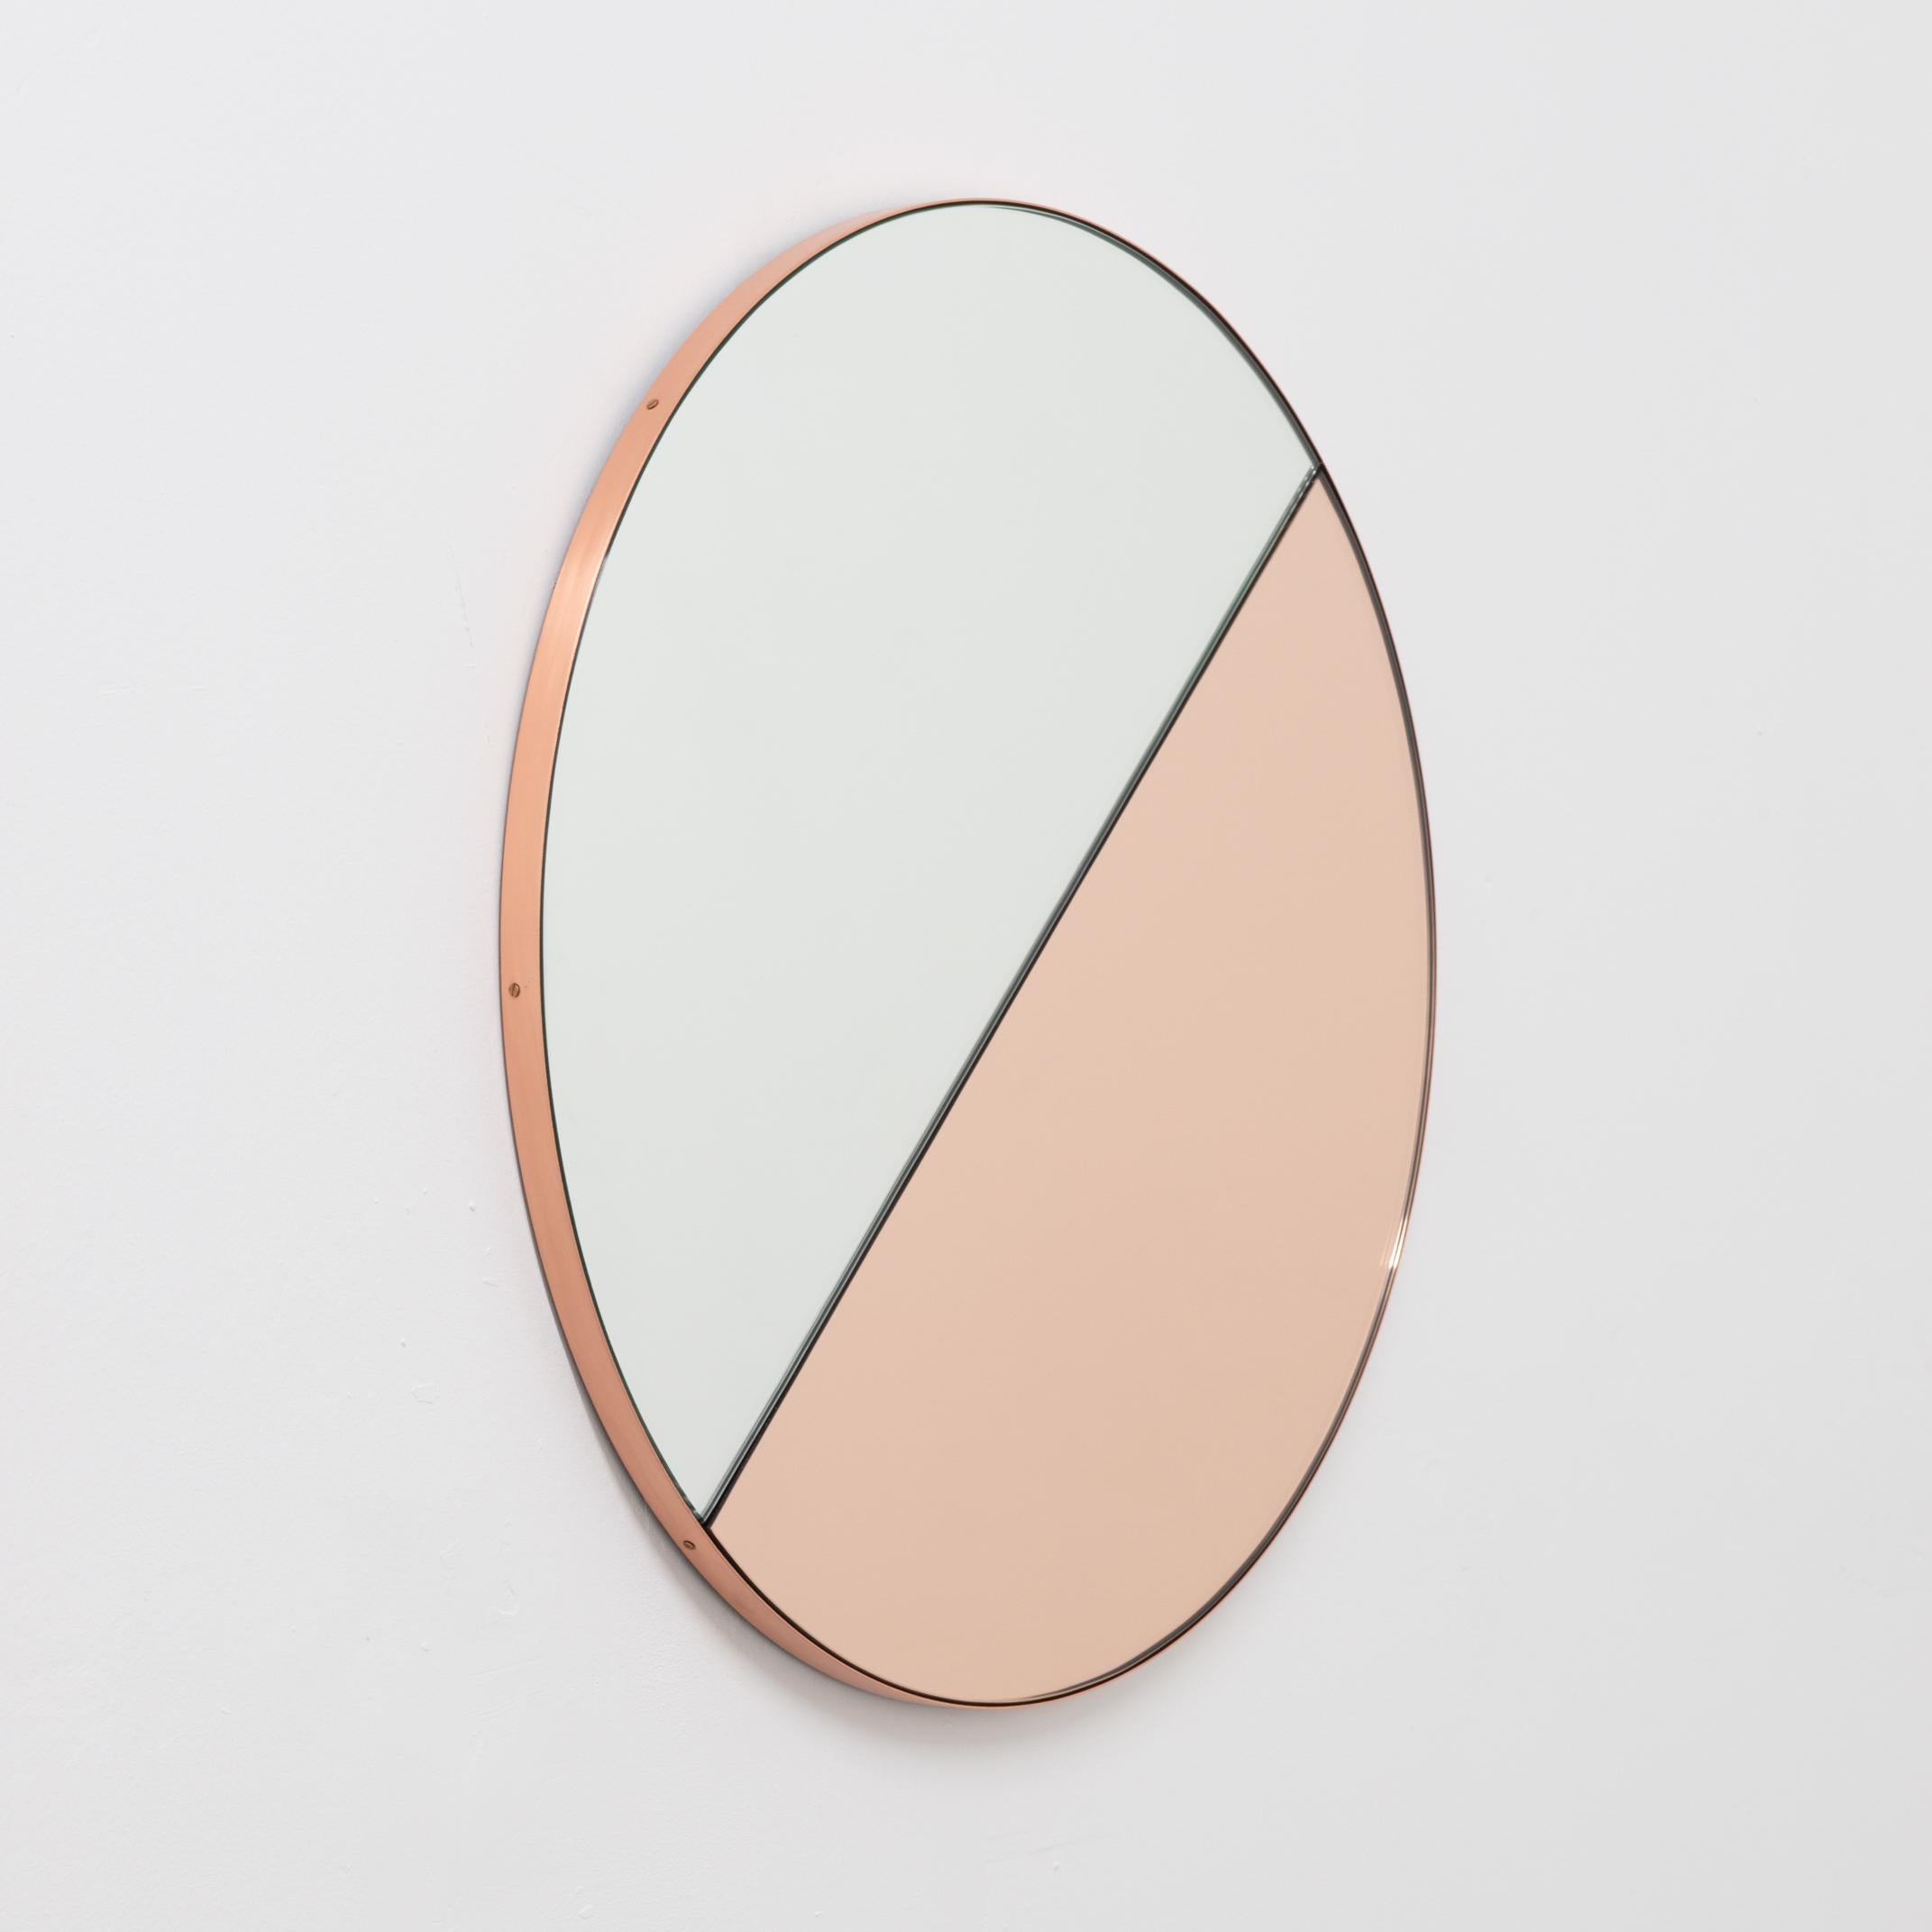 Contemporary In Stock Orbis Dualis Peach Silver Round Mirror with Copper Frame, Medium For Sale